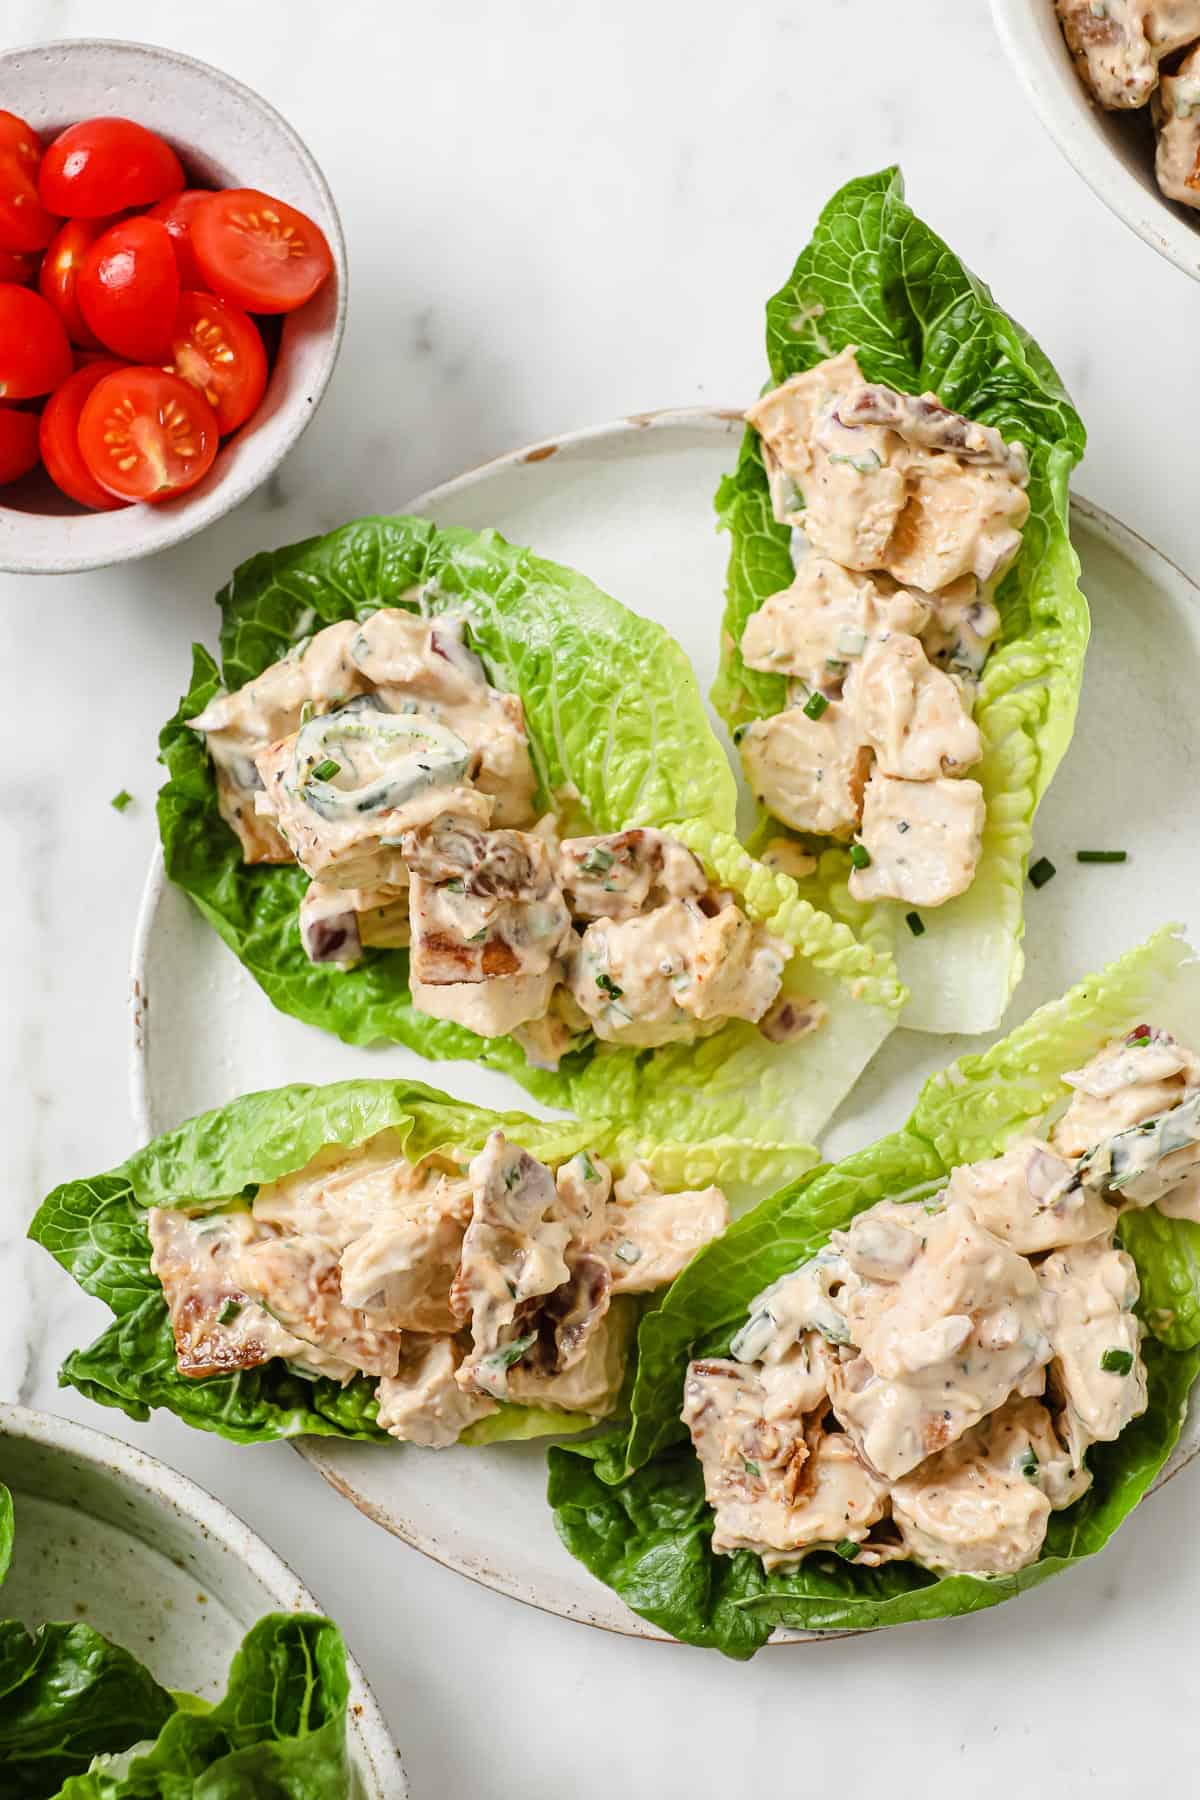 a bowl of chicken salad, surrounded by fresh tomatoes, chives, and lettuce wraps